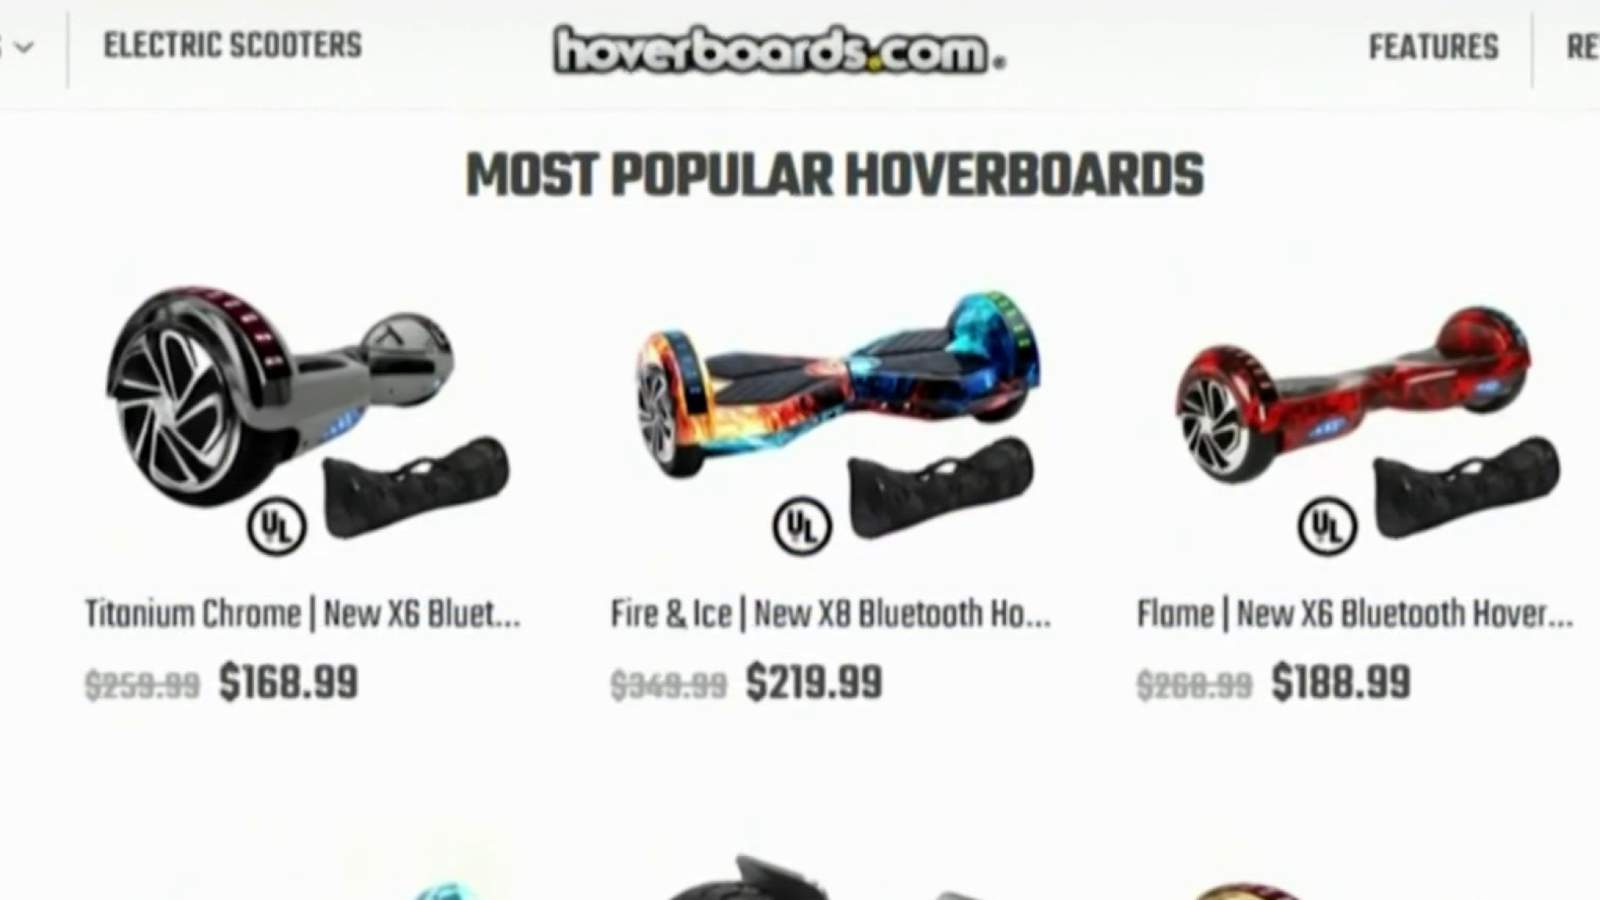 Consumers warned about hoverboards website: What to know